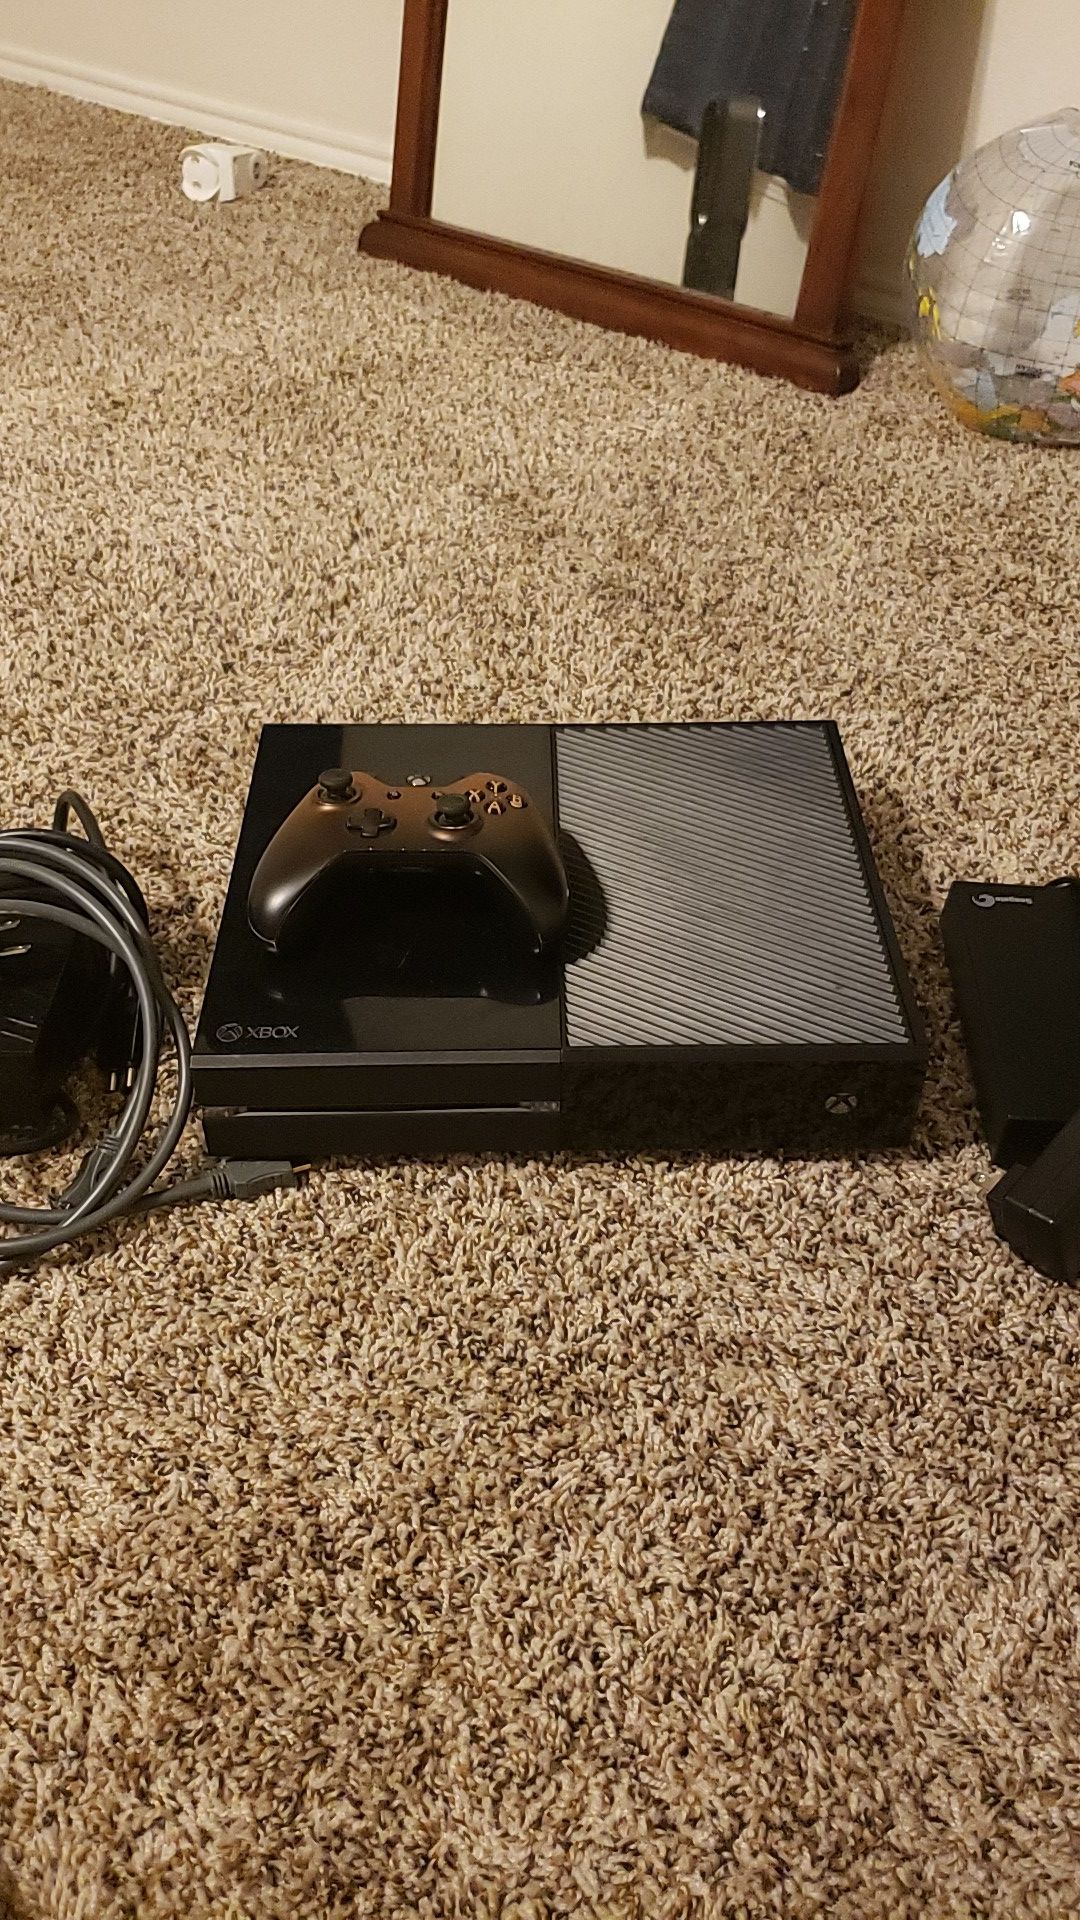 XBOX ONE WITH 4 TB HARD DRIVE